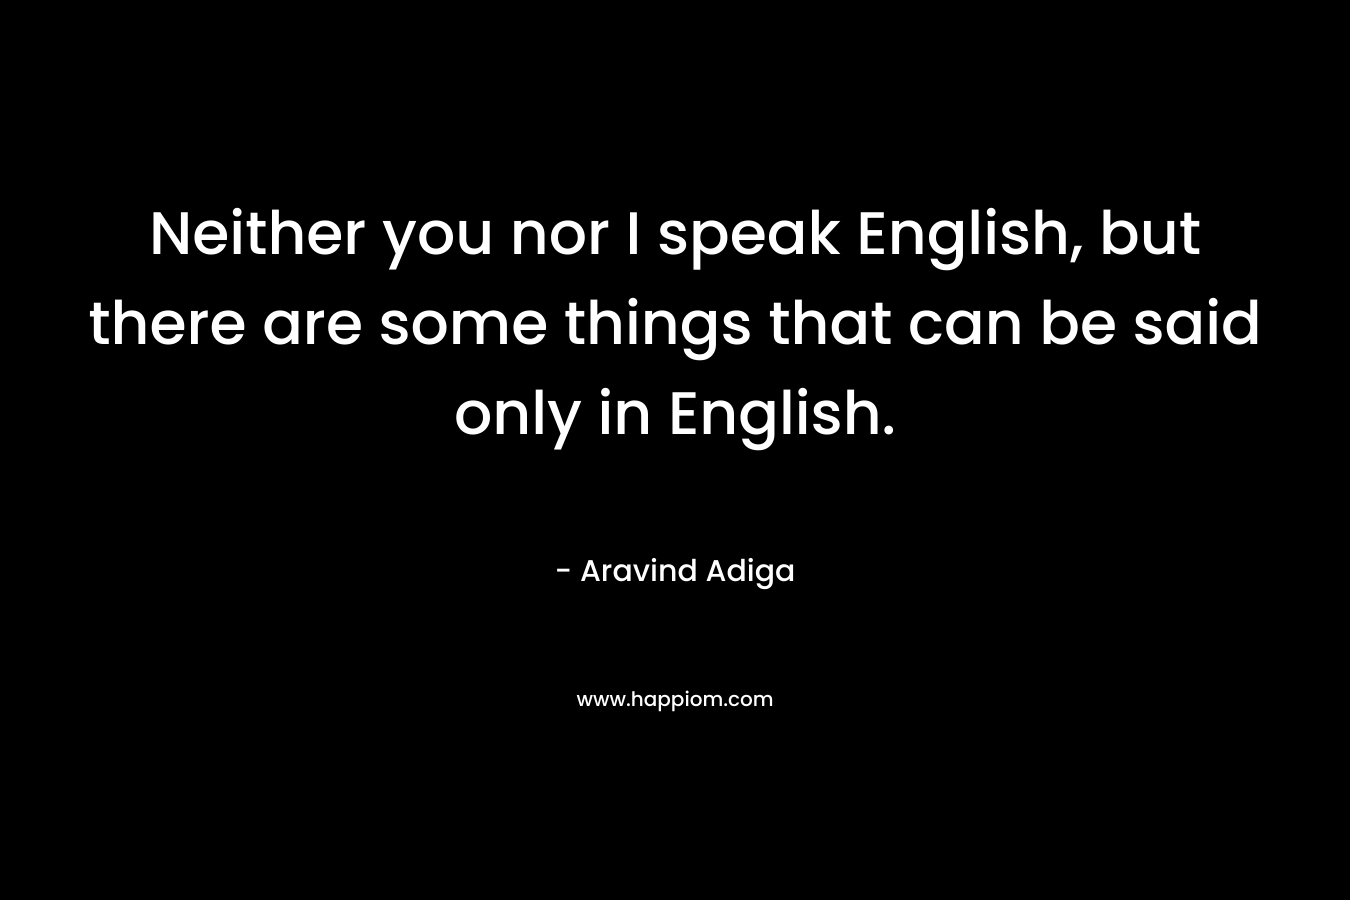 Neither you nor I speak English, but there are some things that can be said only in English.